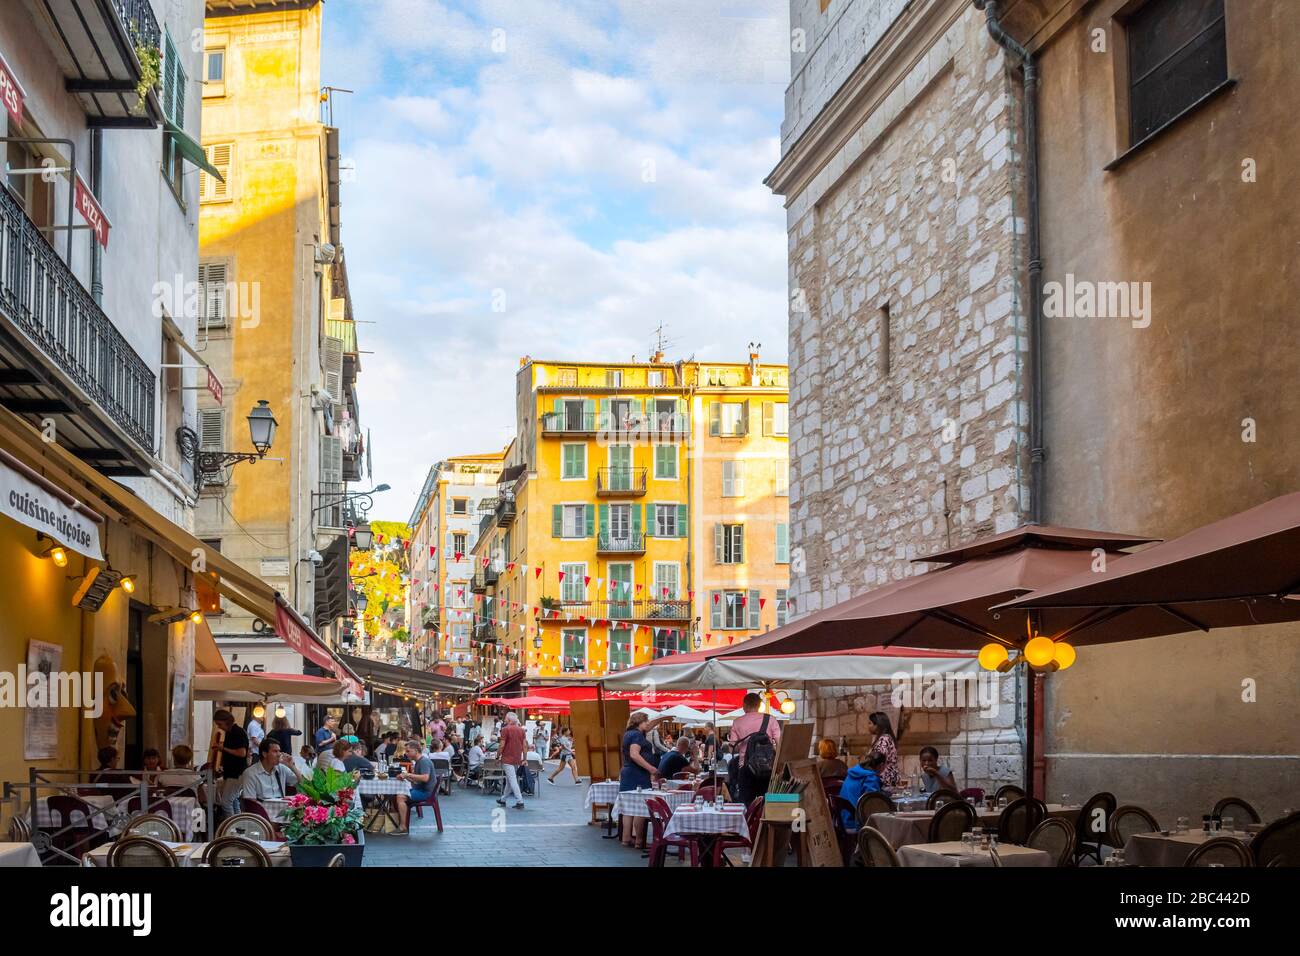 A lively afternoon at the Place Rossetti as tourists enjoy the cafes and shops in the colorful Vieux Old Town of Nice, France on the French Riviera. Stock Photo